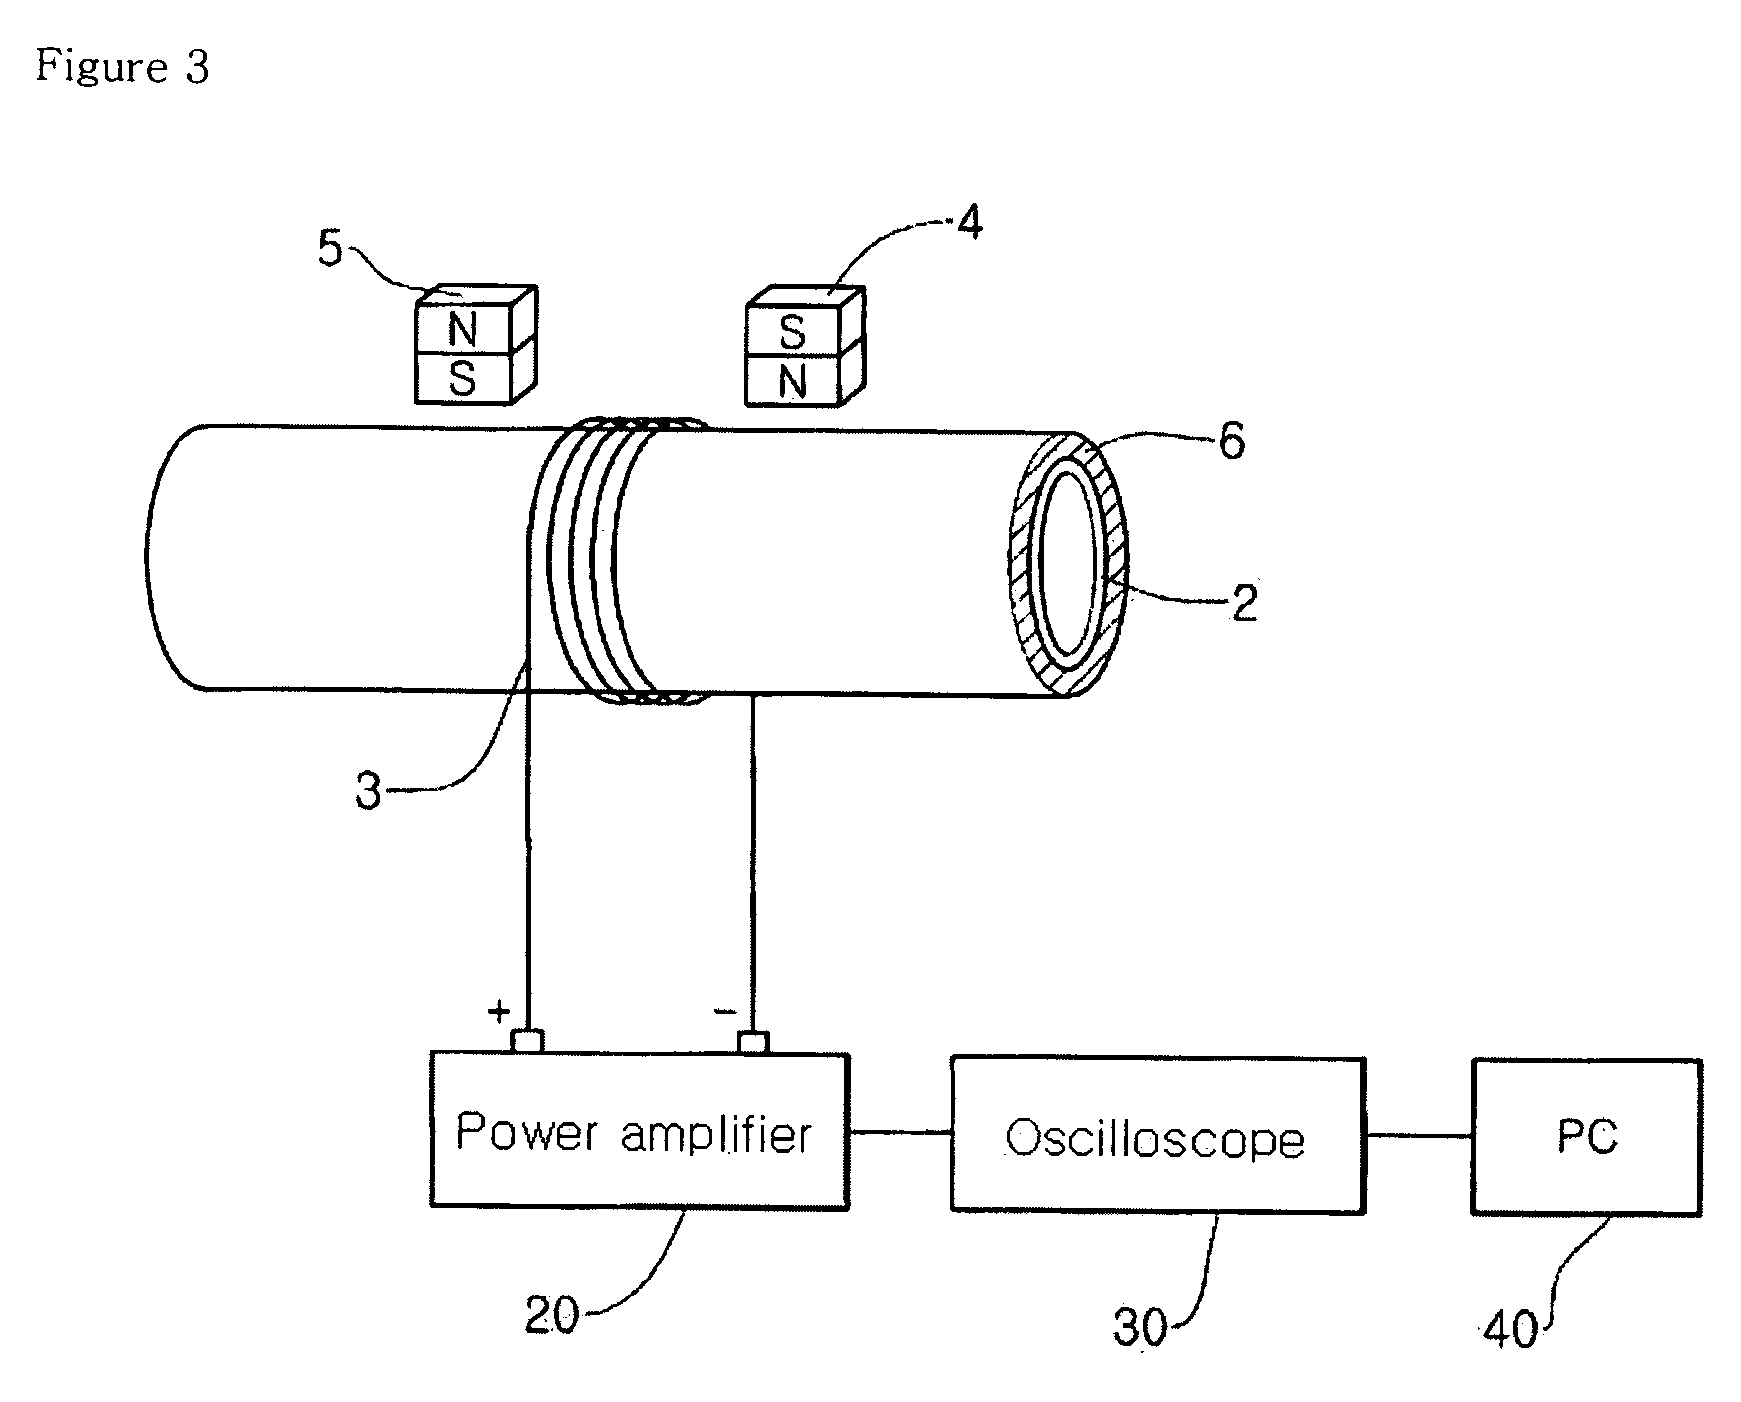 Apparatus for generating and measuring bending vibration in a non-ferromagnetic pipe without physical contact